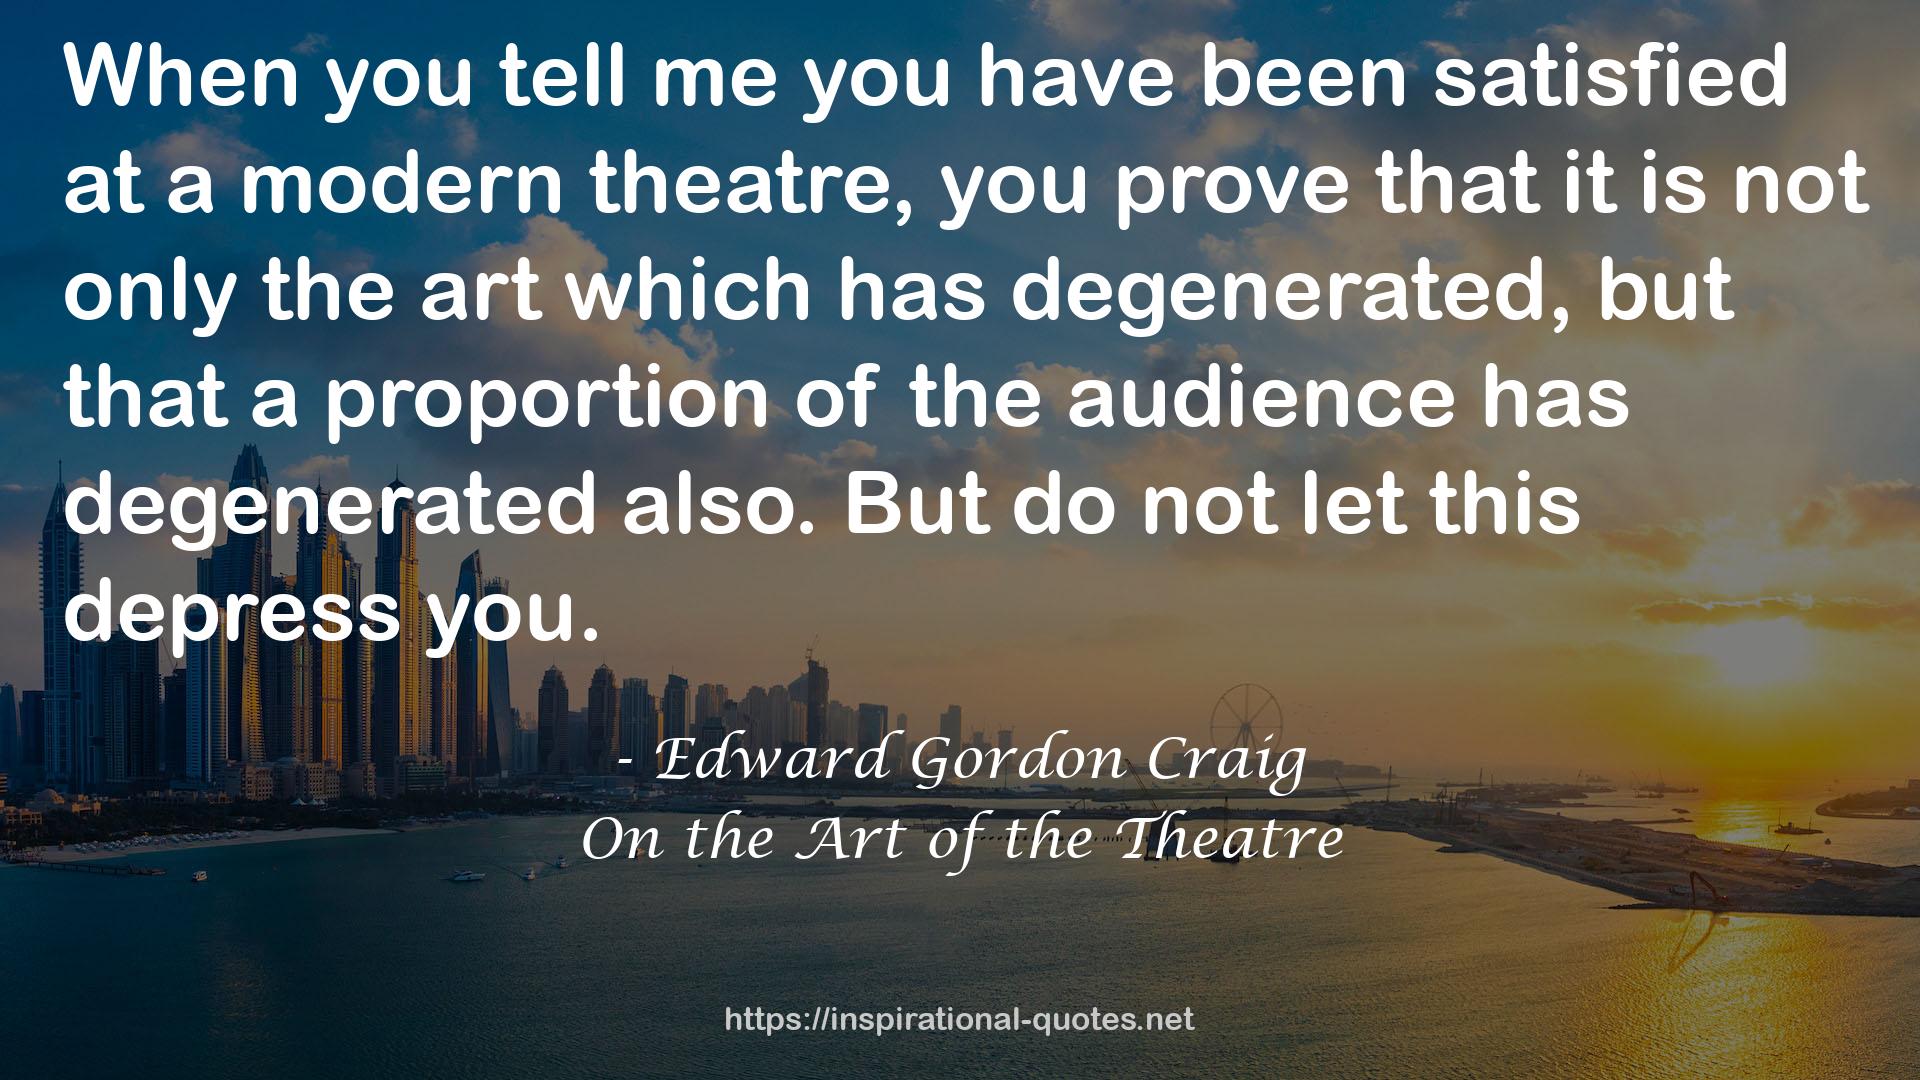 On the Art of the Theatre QUOTES